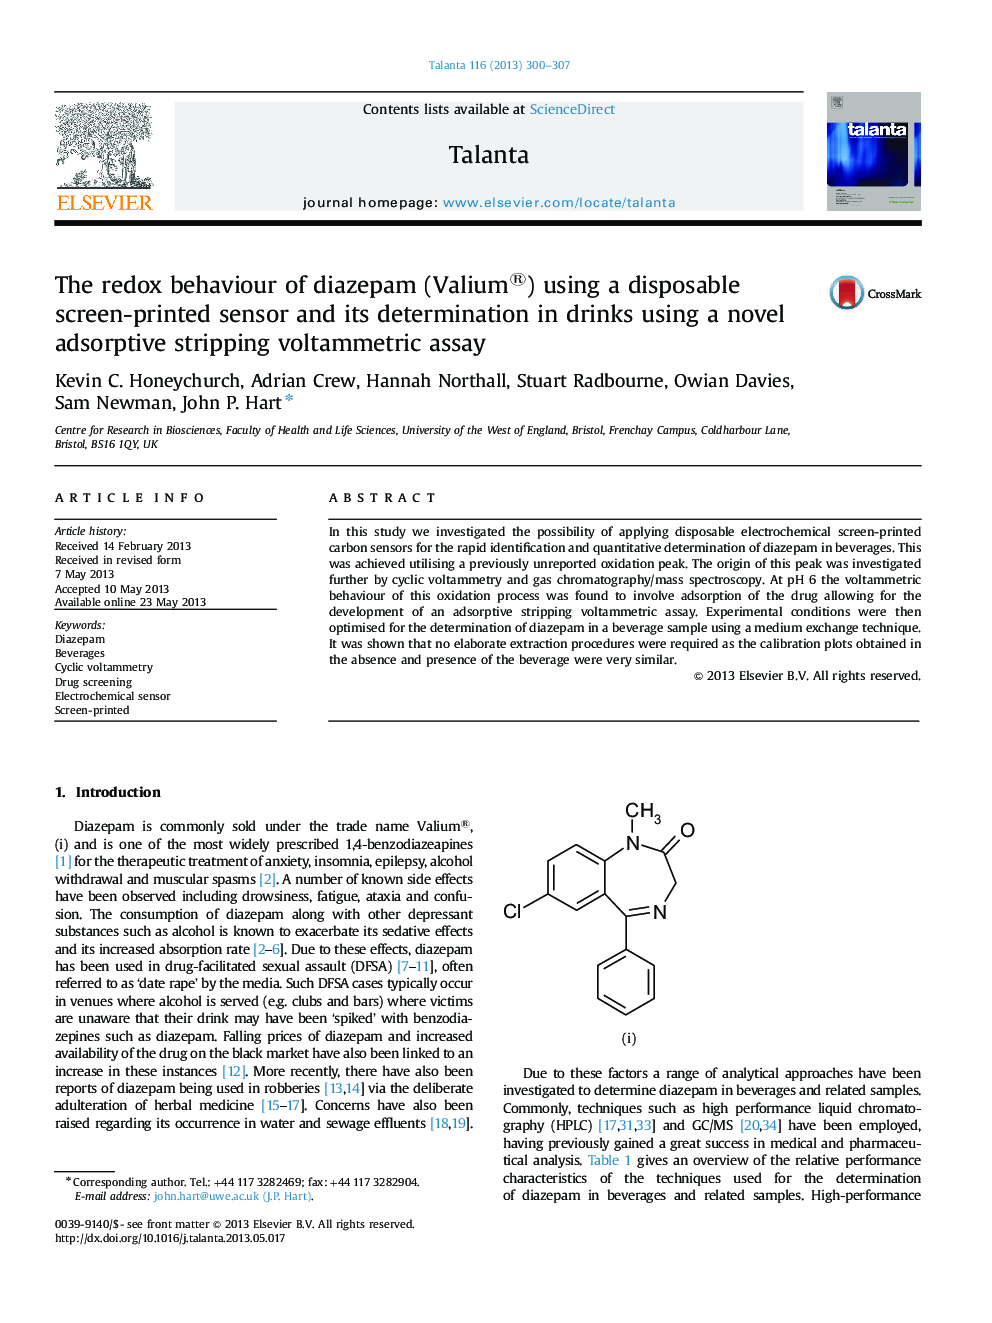 The redox behaviour of diazepam (Valium®) using a disposable screen-printed sensor and its determination in drinks using a novel adsorptive stripping voltammetric assay